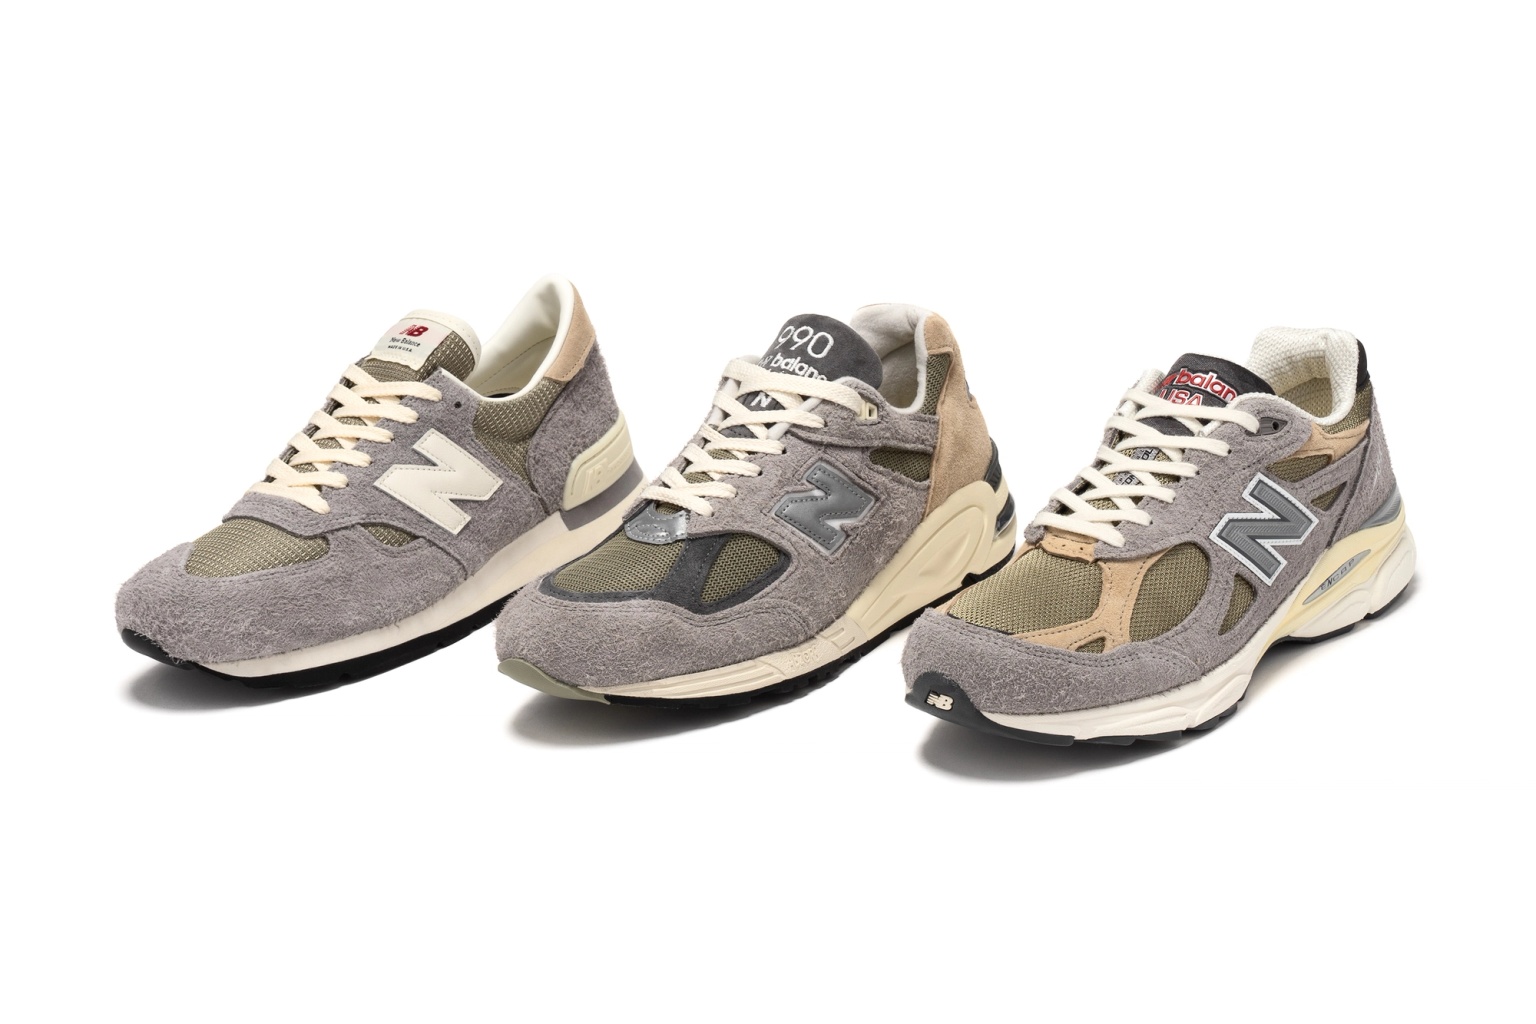 New Balance x Teddy Santis Made in USA 990 Collection | Release Date: 04.28.22